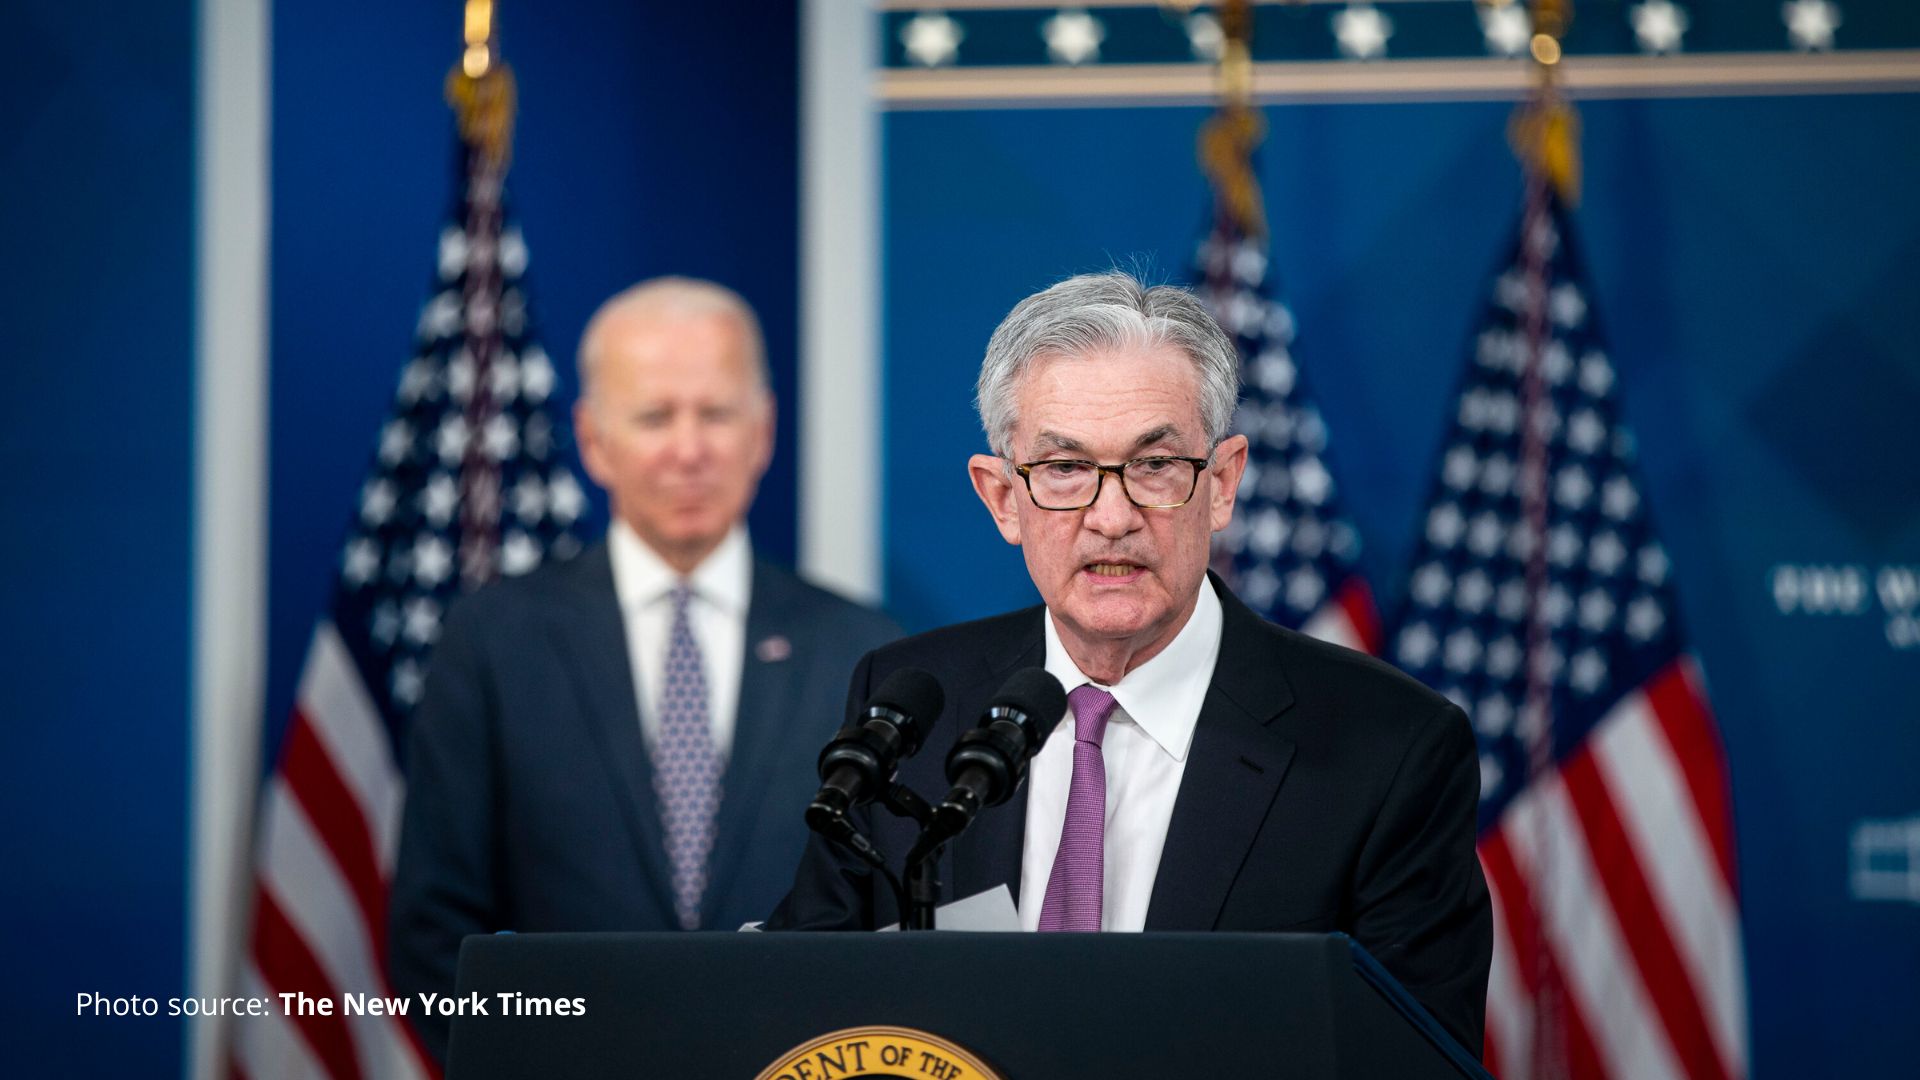 MARKETS-DIVE-AS-FED-RAISES-RATES-AGAIN-AND-POWELL-SUGGESTS-FIGHT-AGAINST-INFLATION-FAR-FROM-DONE